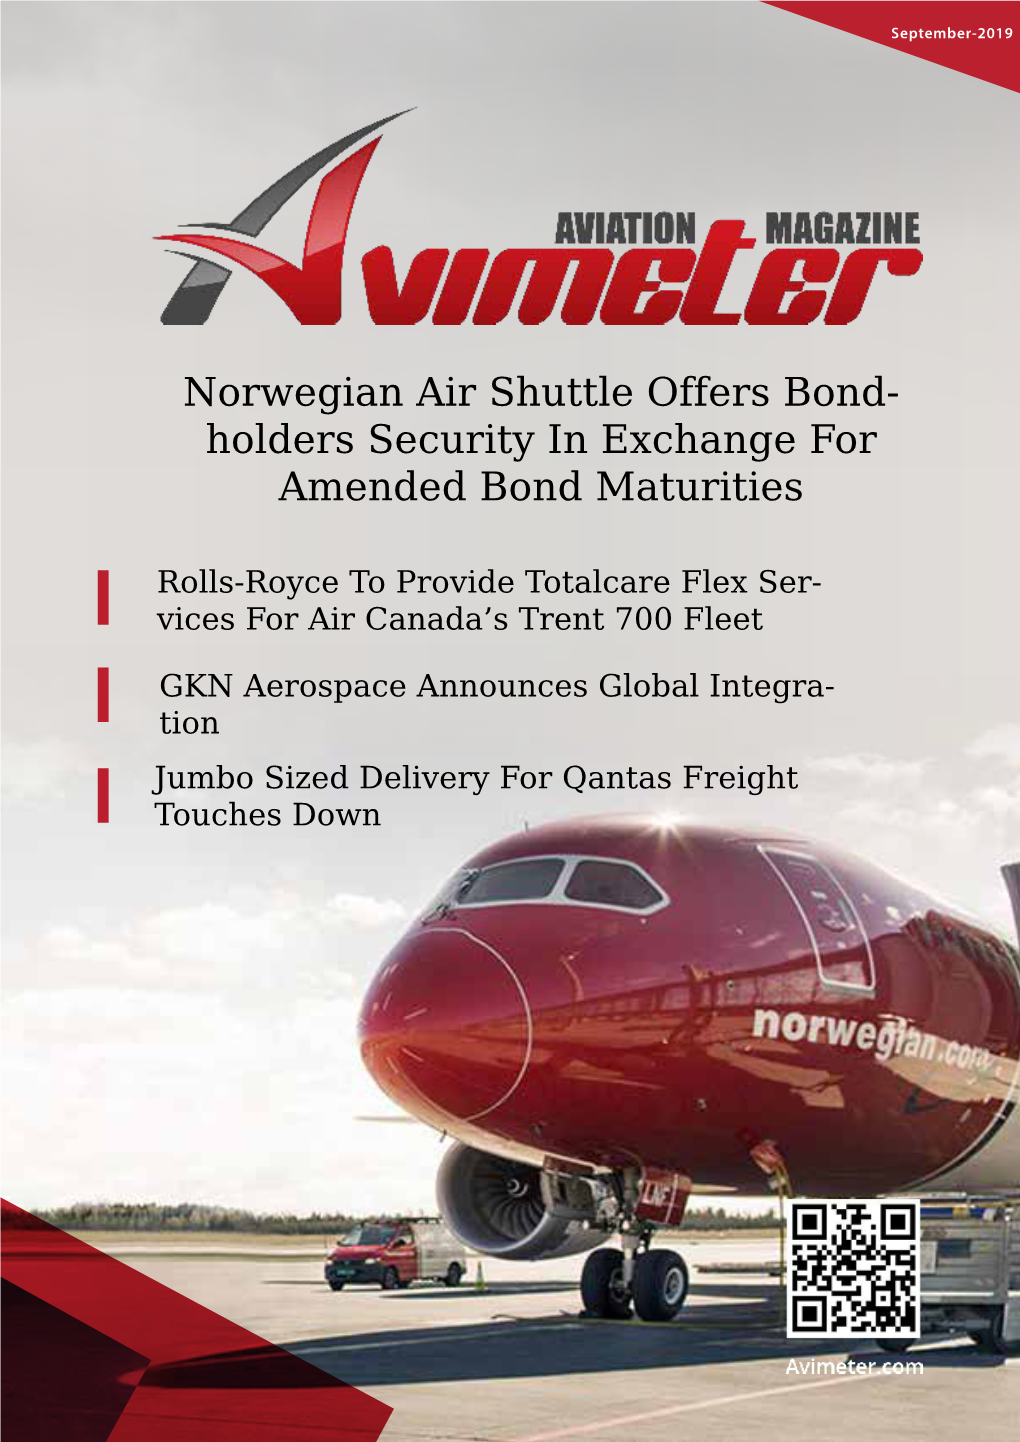 Norwegian Air Shuttle Offers Bond- Holders Security in Exchange for Amended Bond Maturities